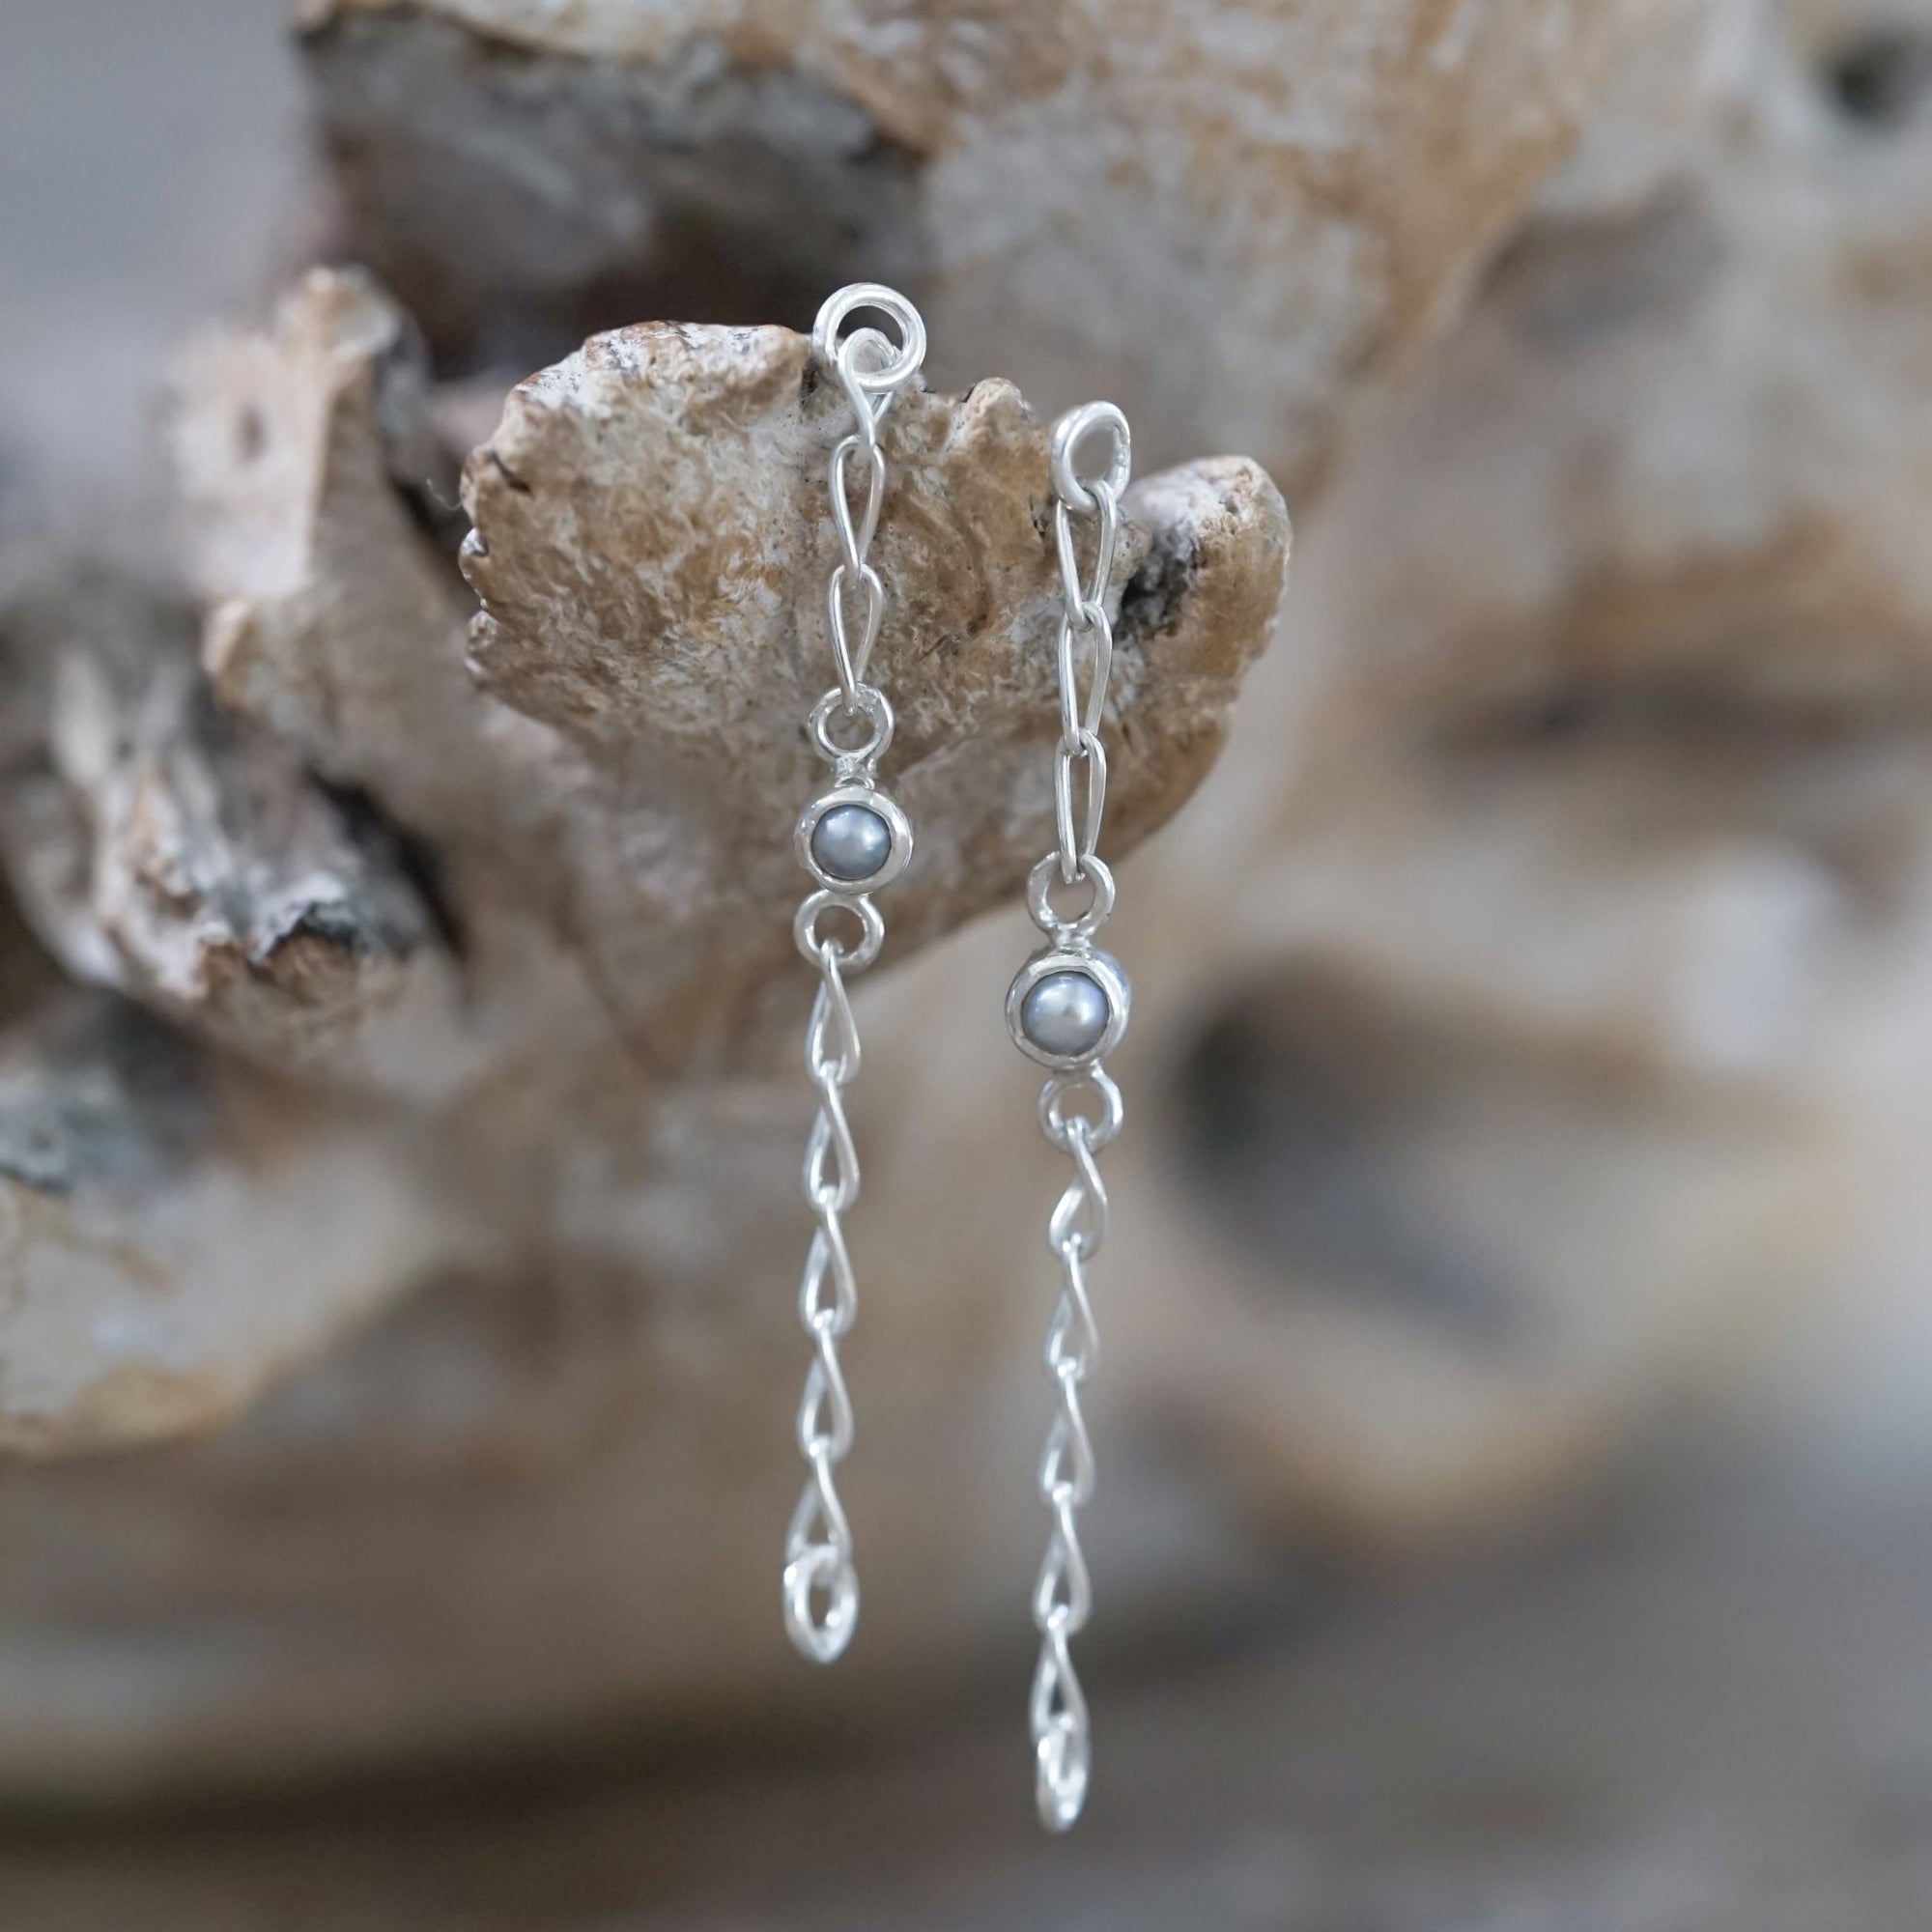 Pearl Ear Chains - Gardens of the Sun | Ethical Jewelry